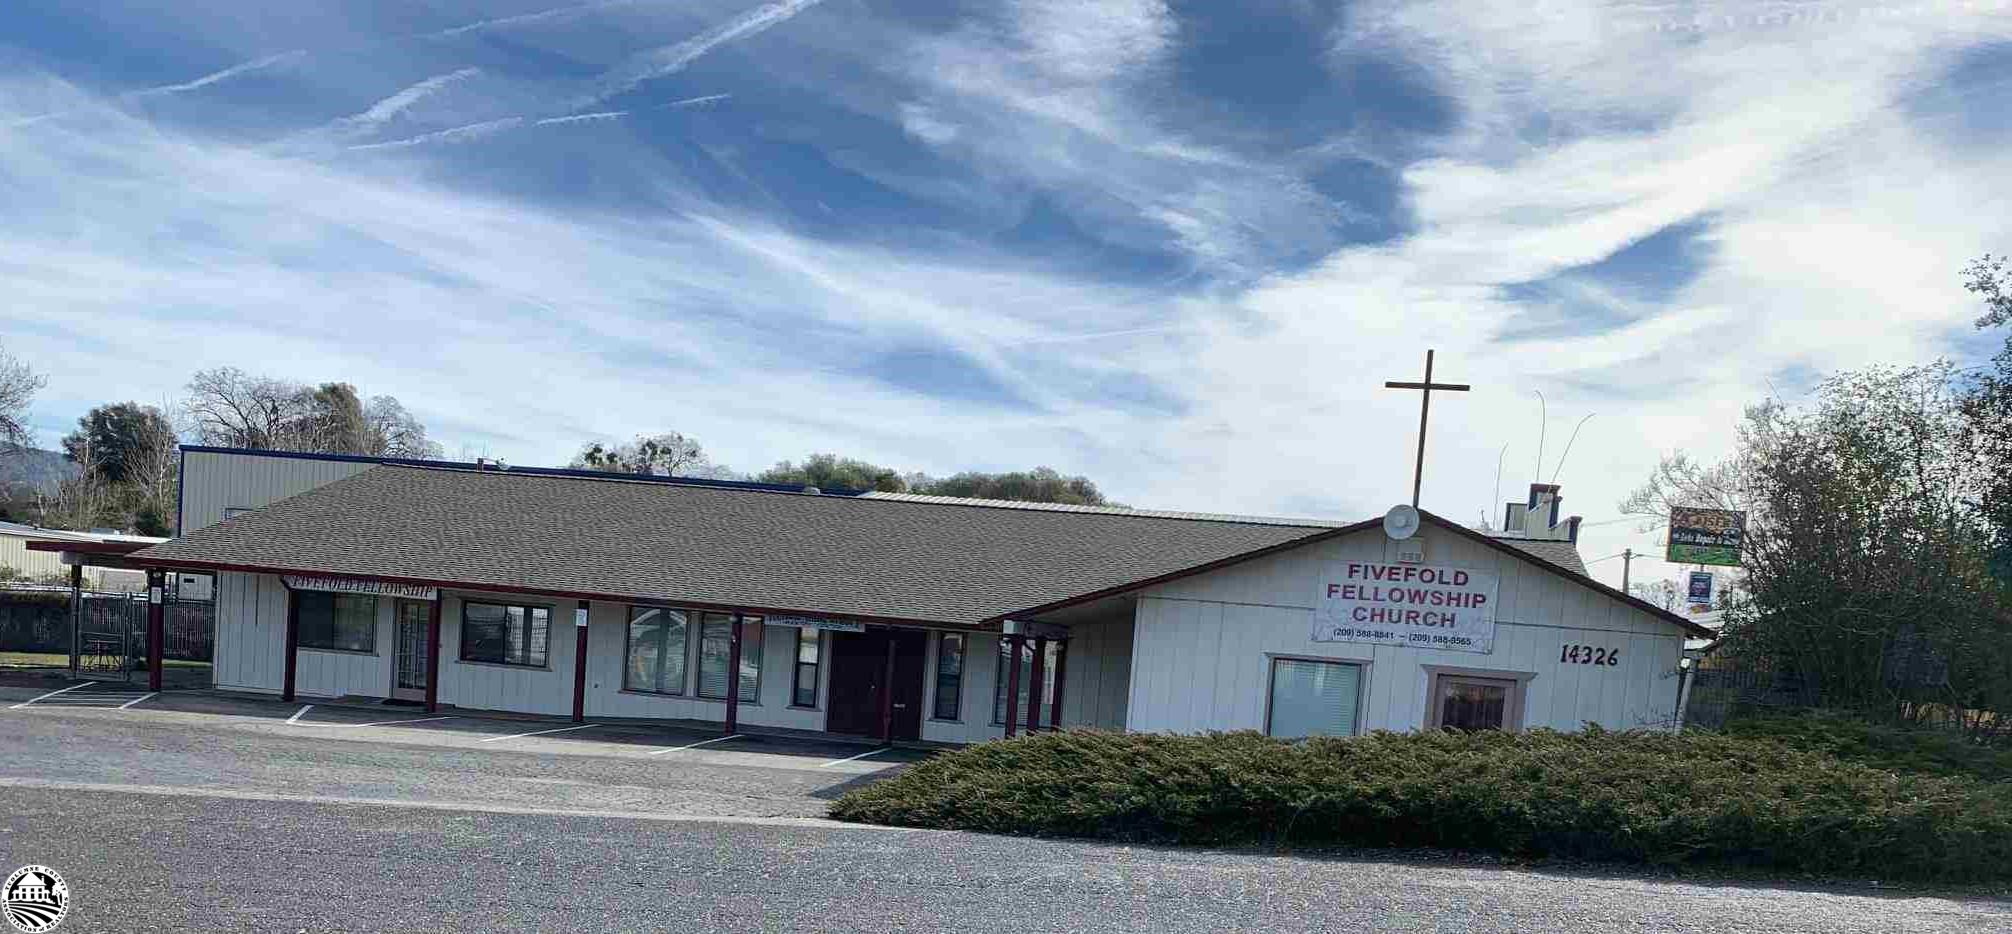 Been leased for years. Great income property. will be vacant March 31, 2023. Subject to an IRS 1031 tax deferred exchange. Well maintained.  Has been a church, day care center and a nursery. Great location for retail right on Tuolumne Road, with easy access. plumbed for 2 additional bathrooms. plus app 300 sf of additional storage space.